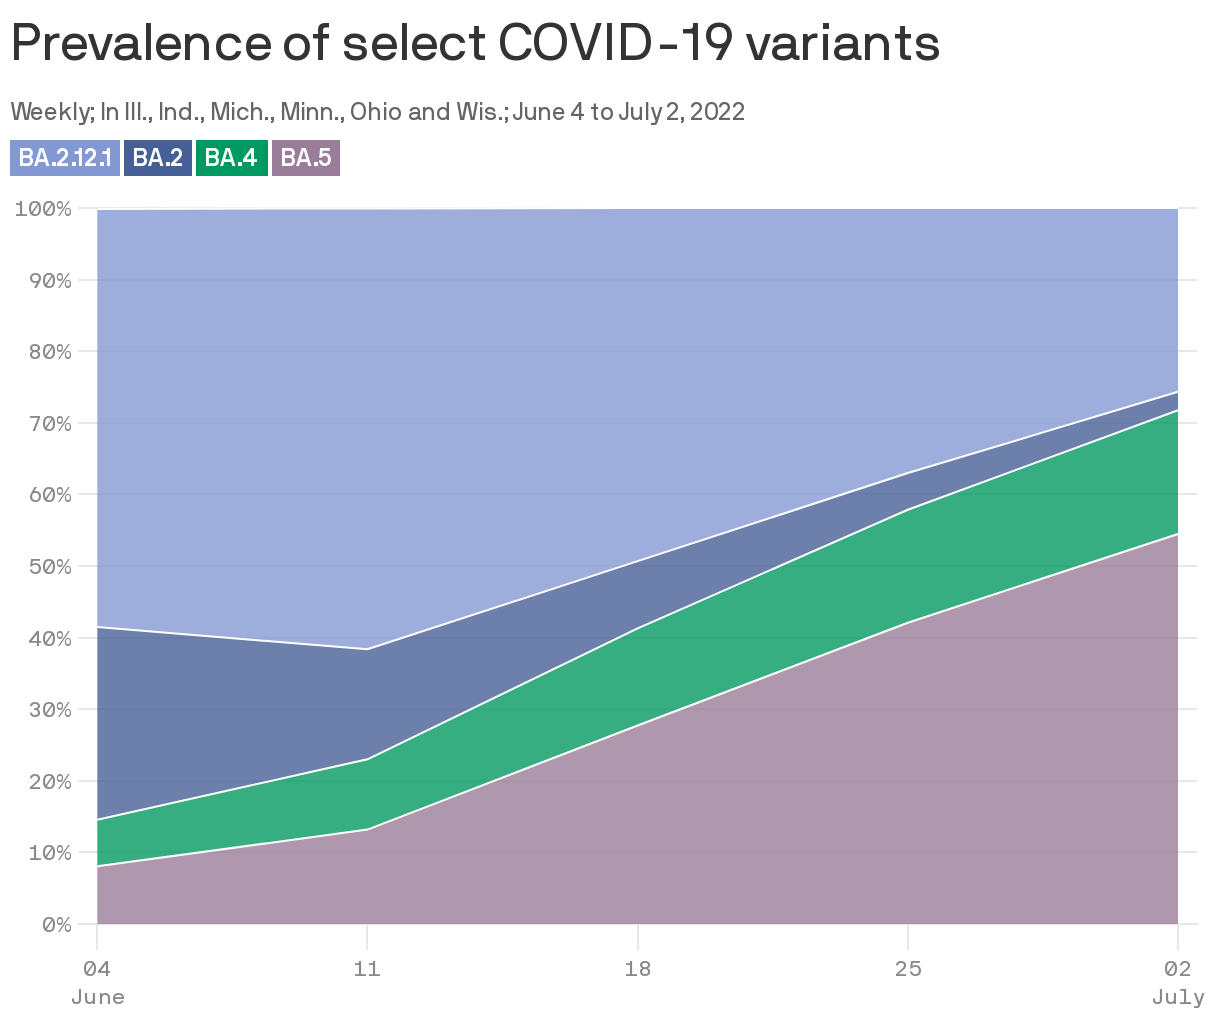 Prevalence of select COVID-19 variants